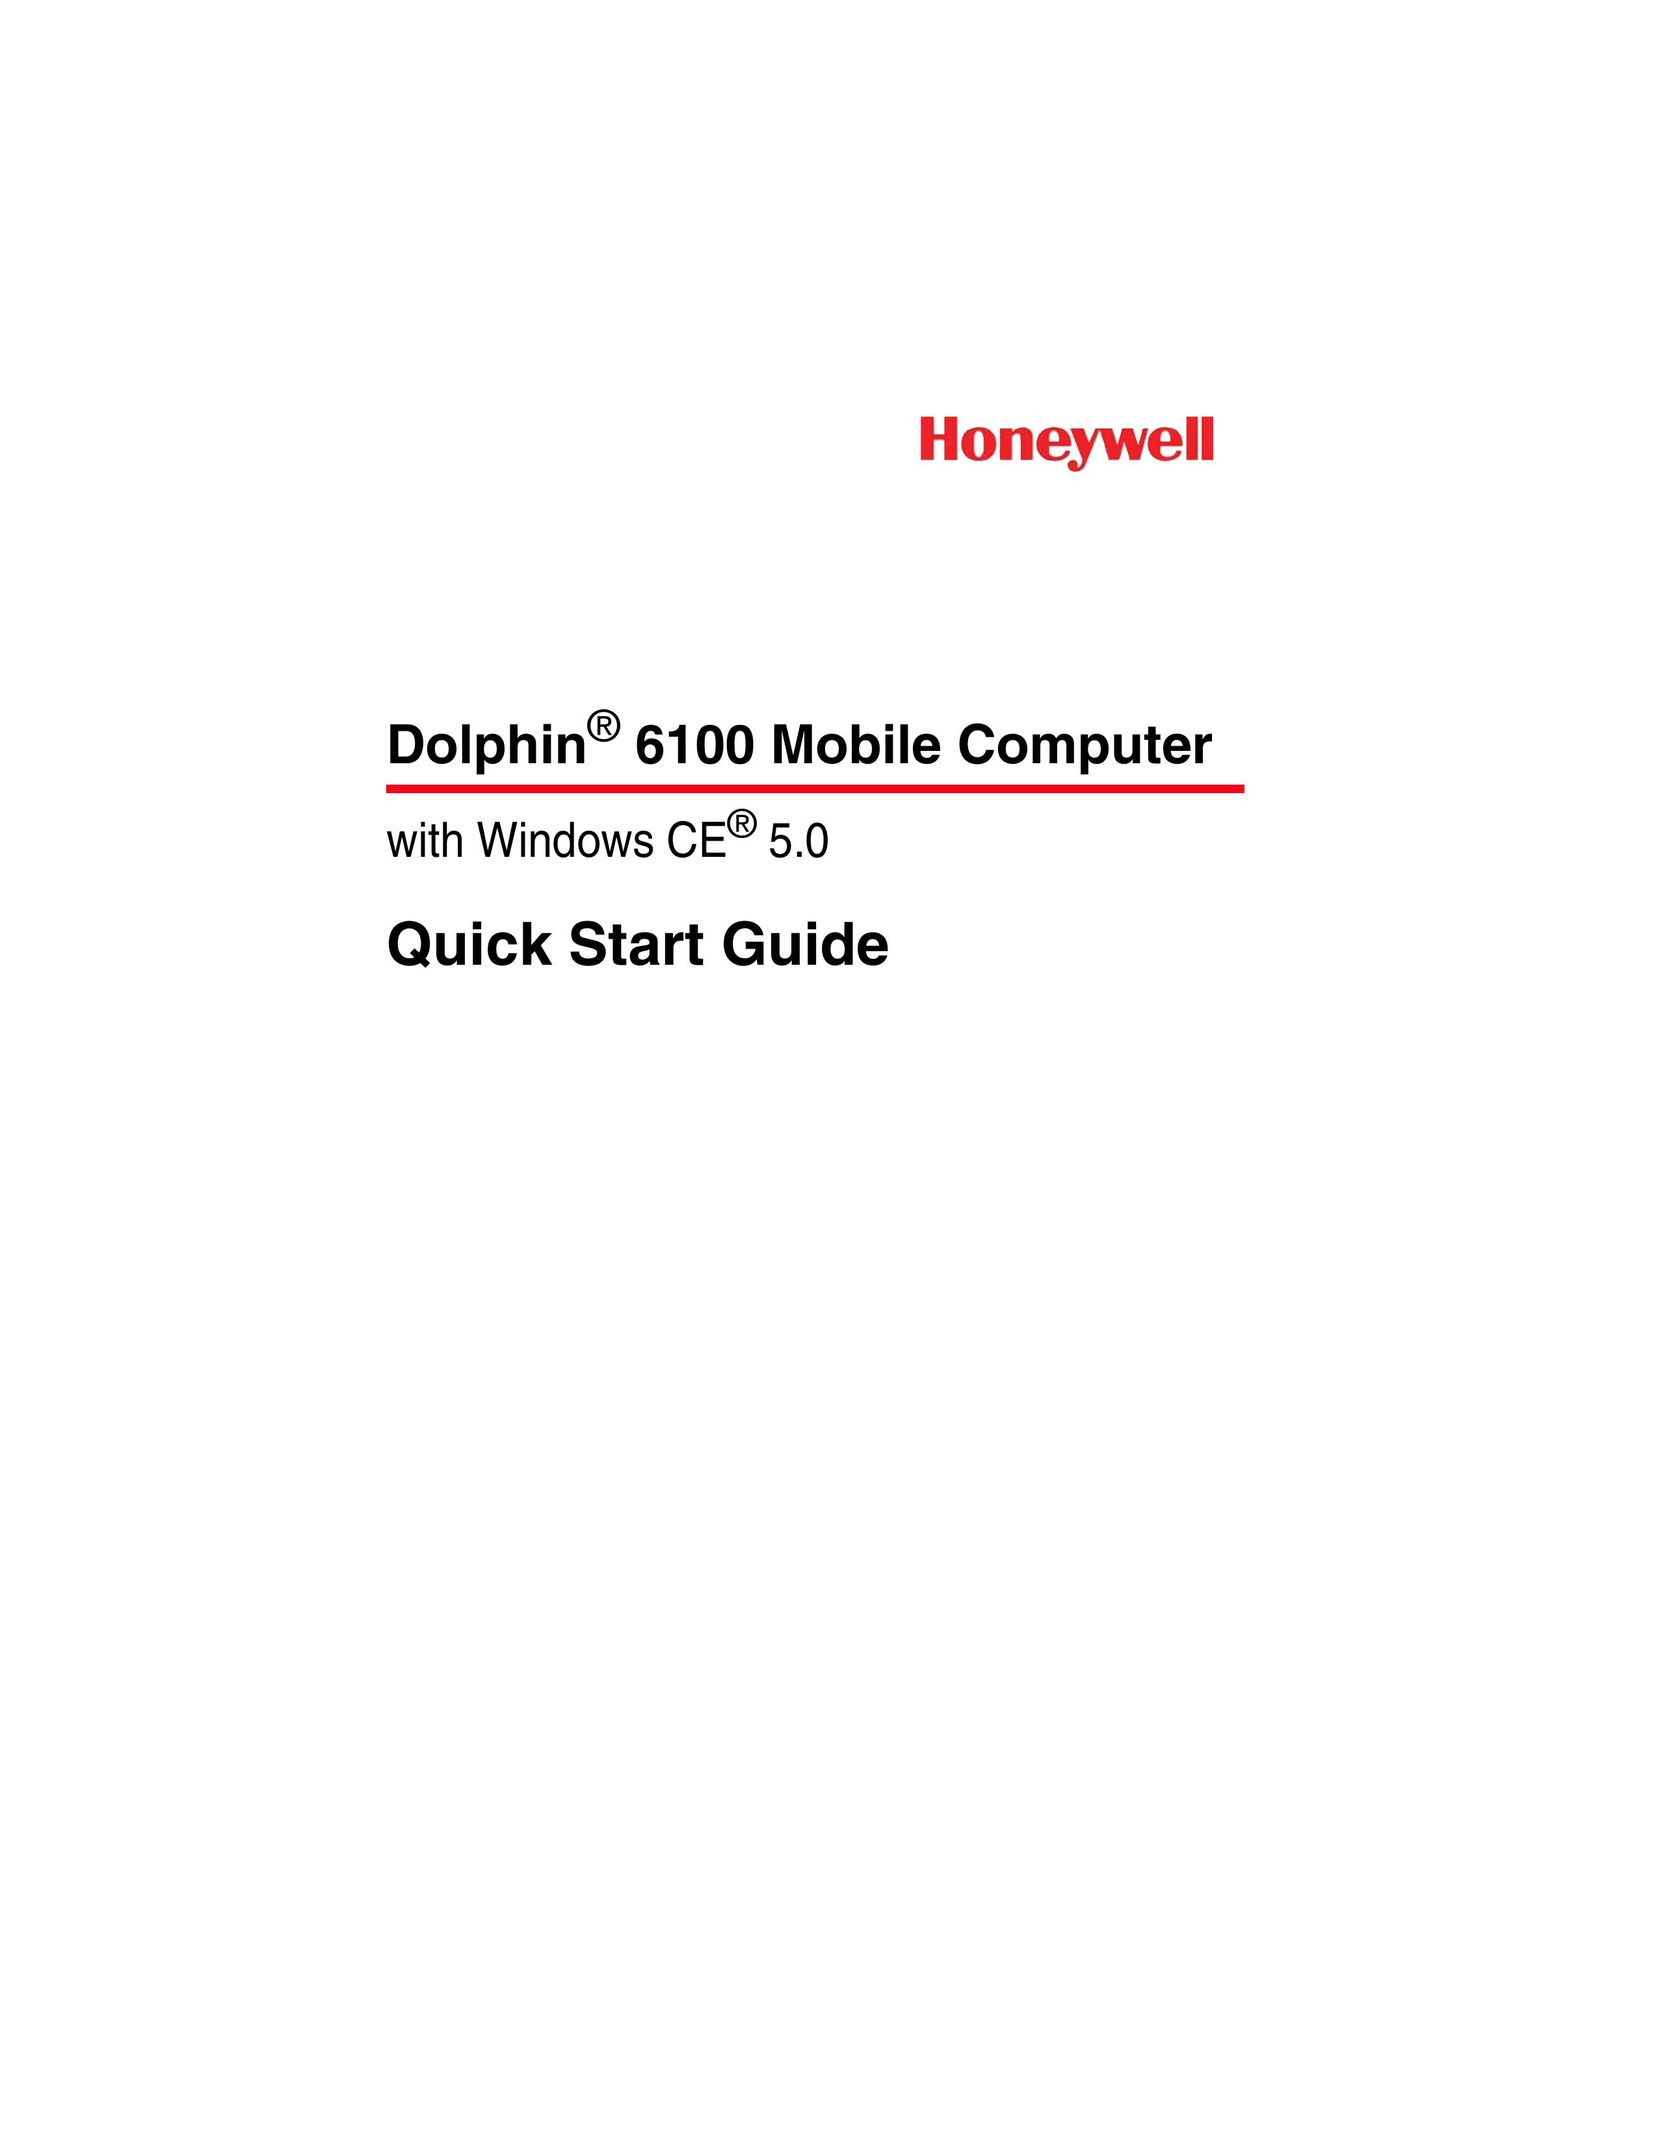 Honeywell Dolphin 6100 Personal Computer User Manual